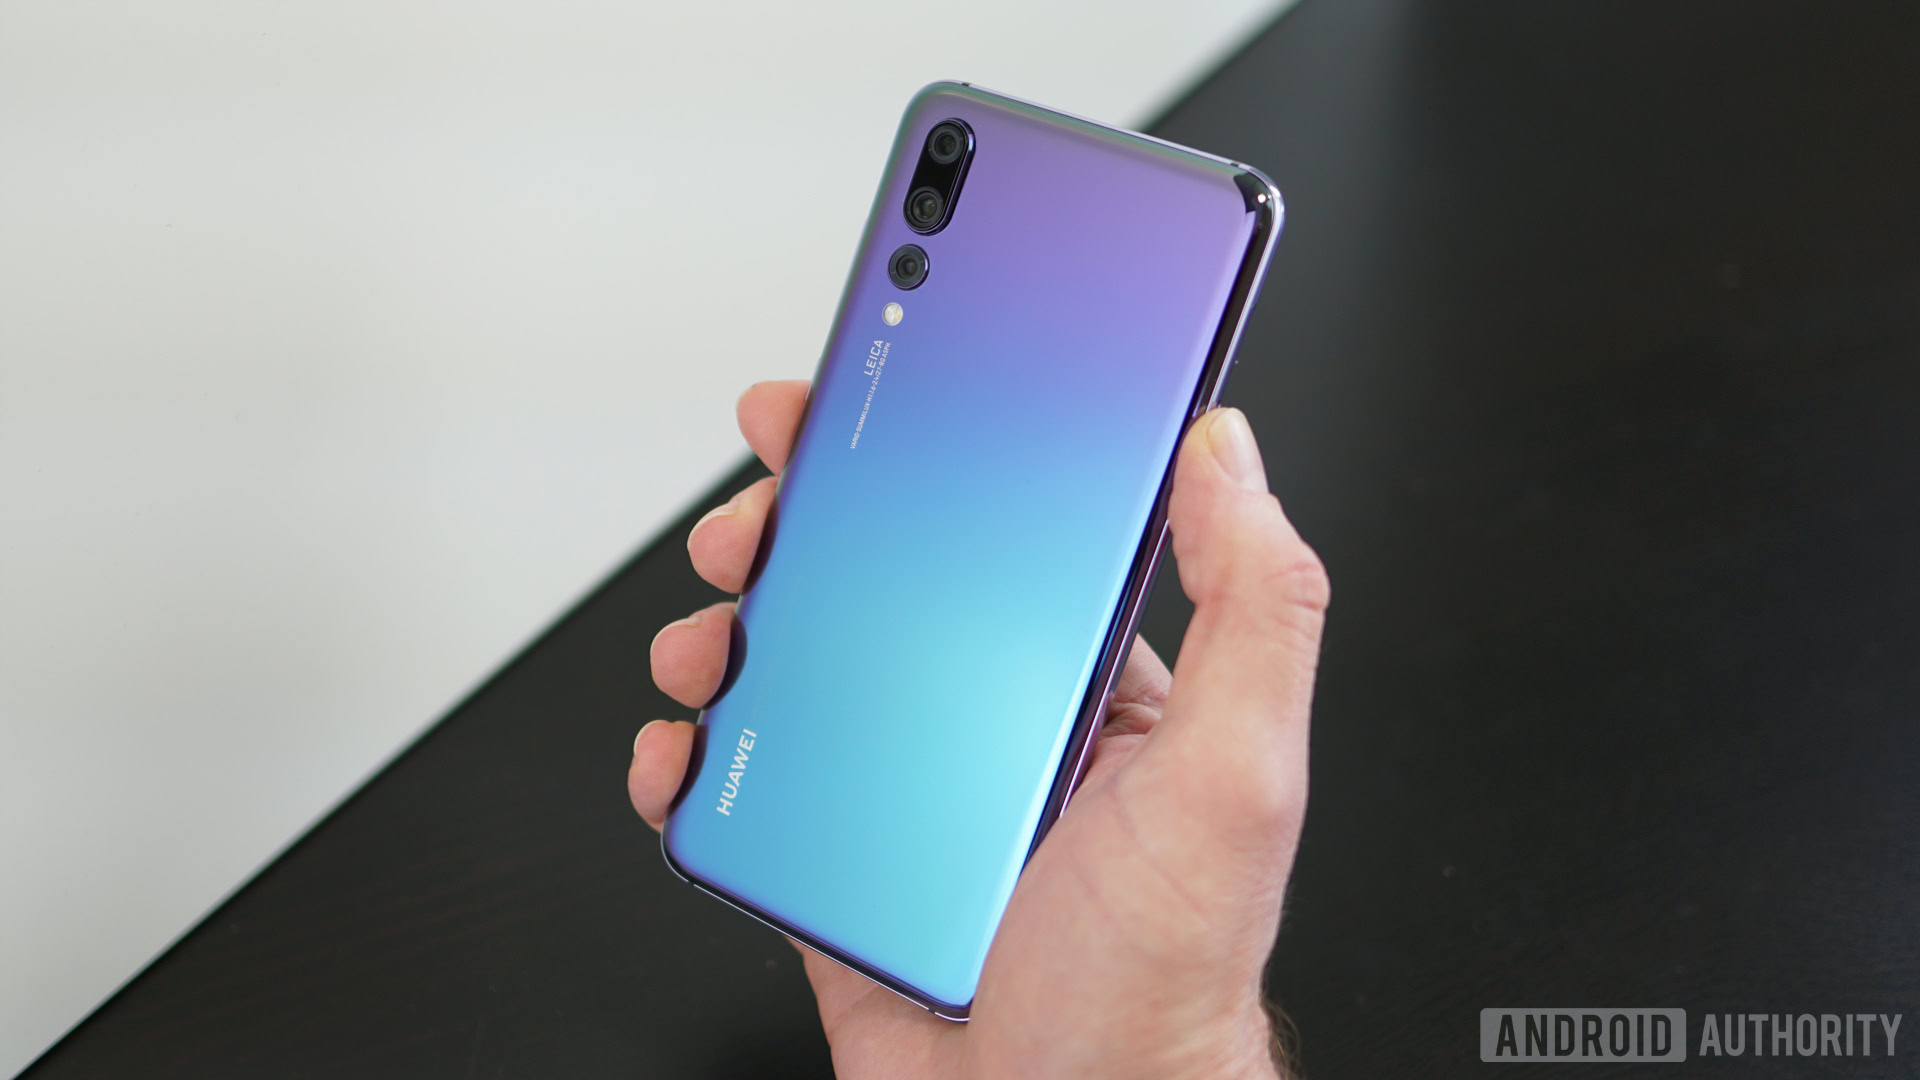 Huawei P20 Pro review: The best smartphone camera, period.